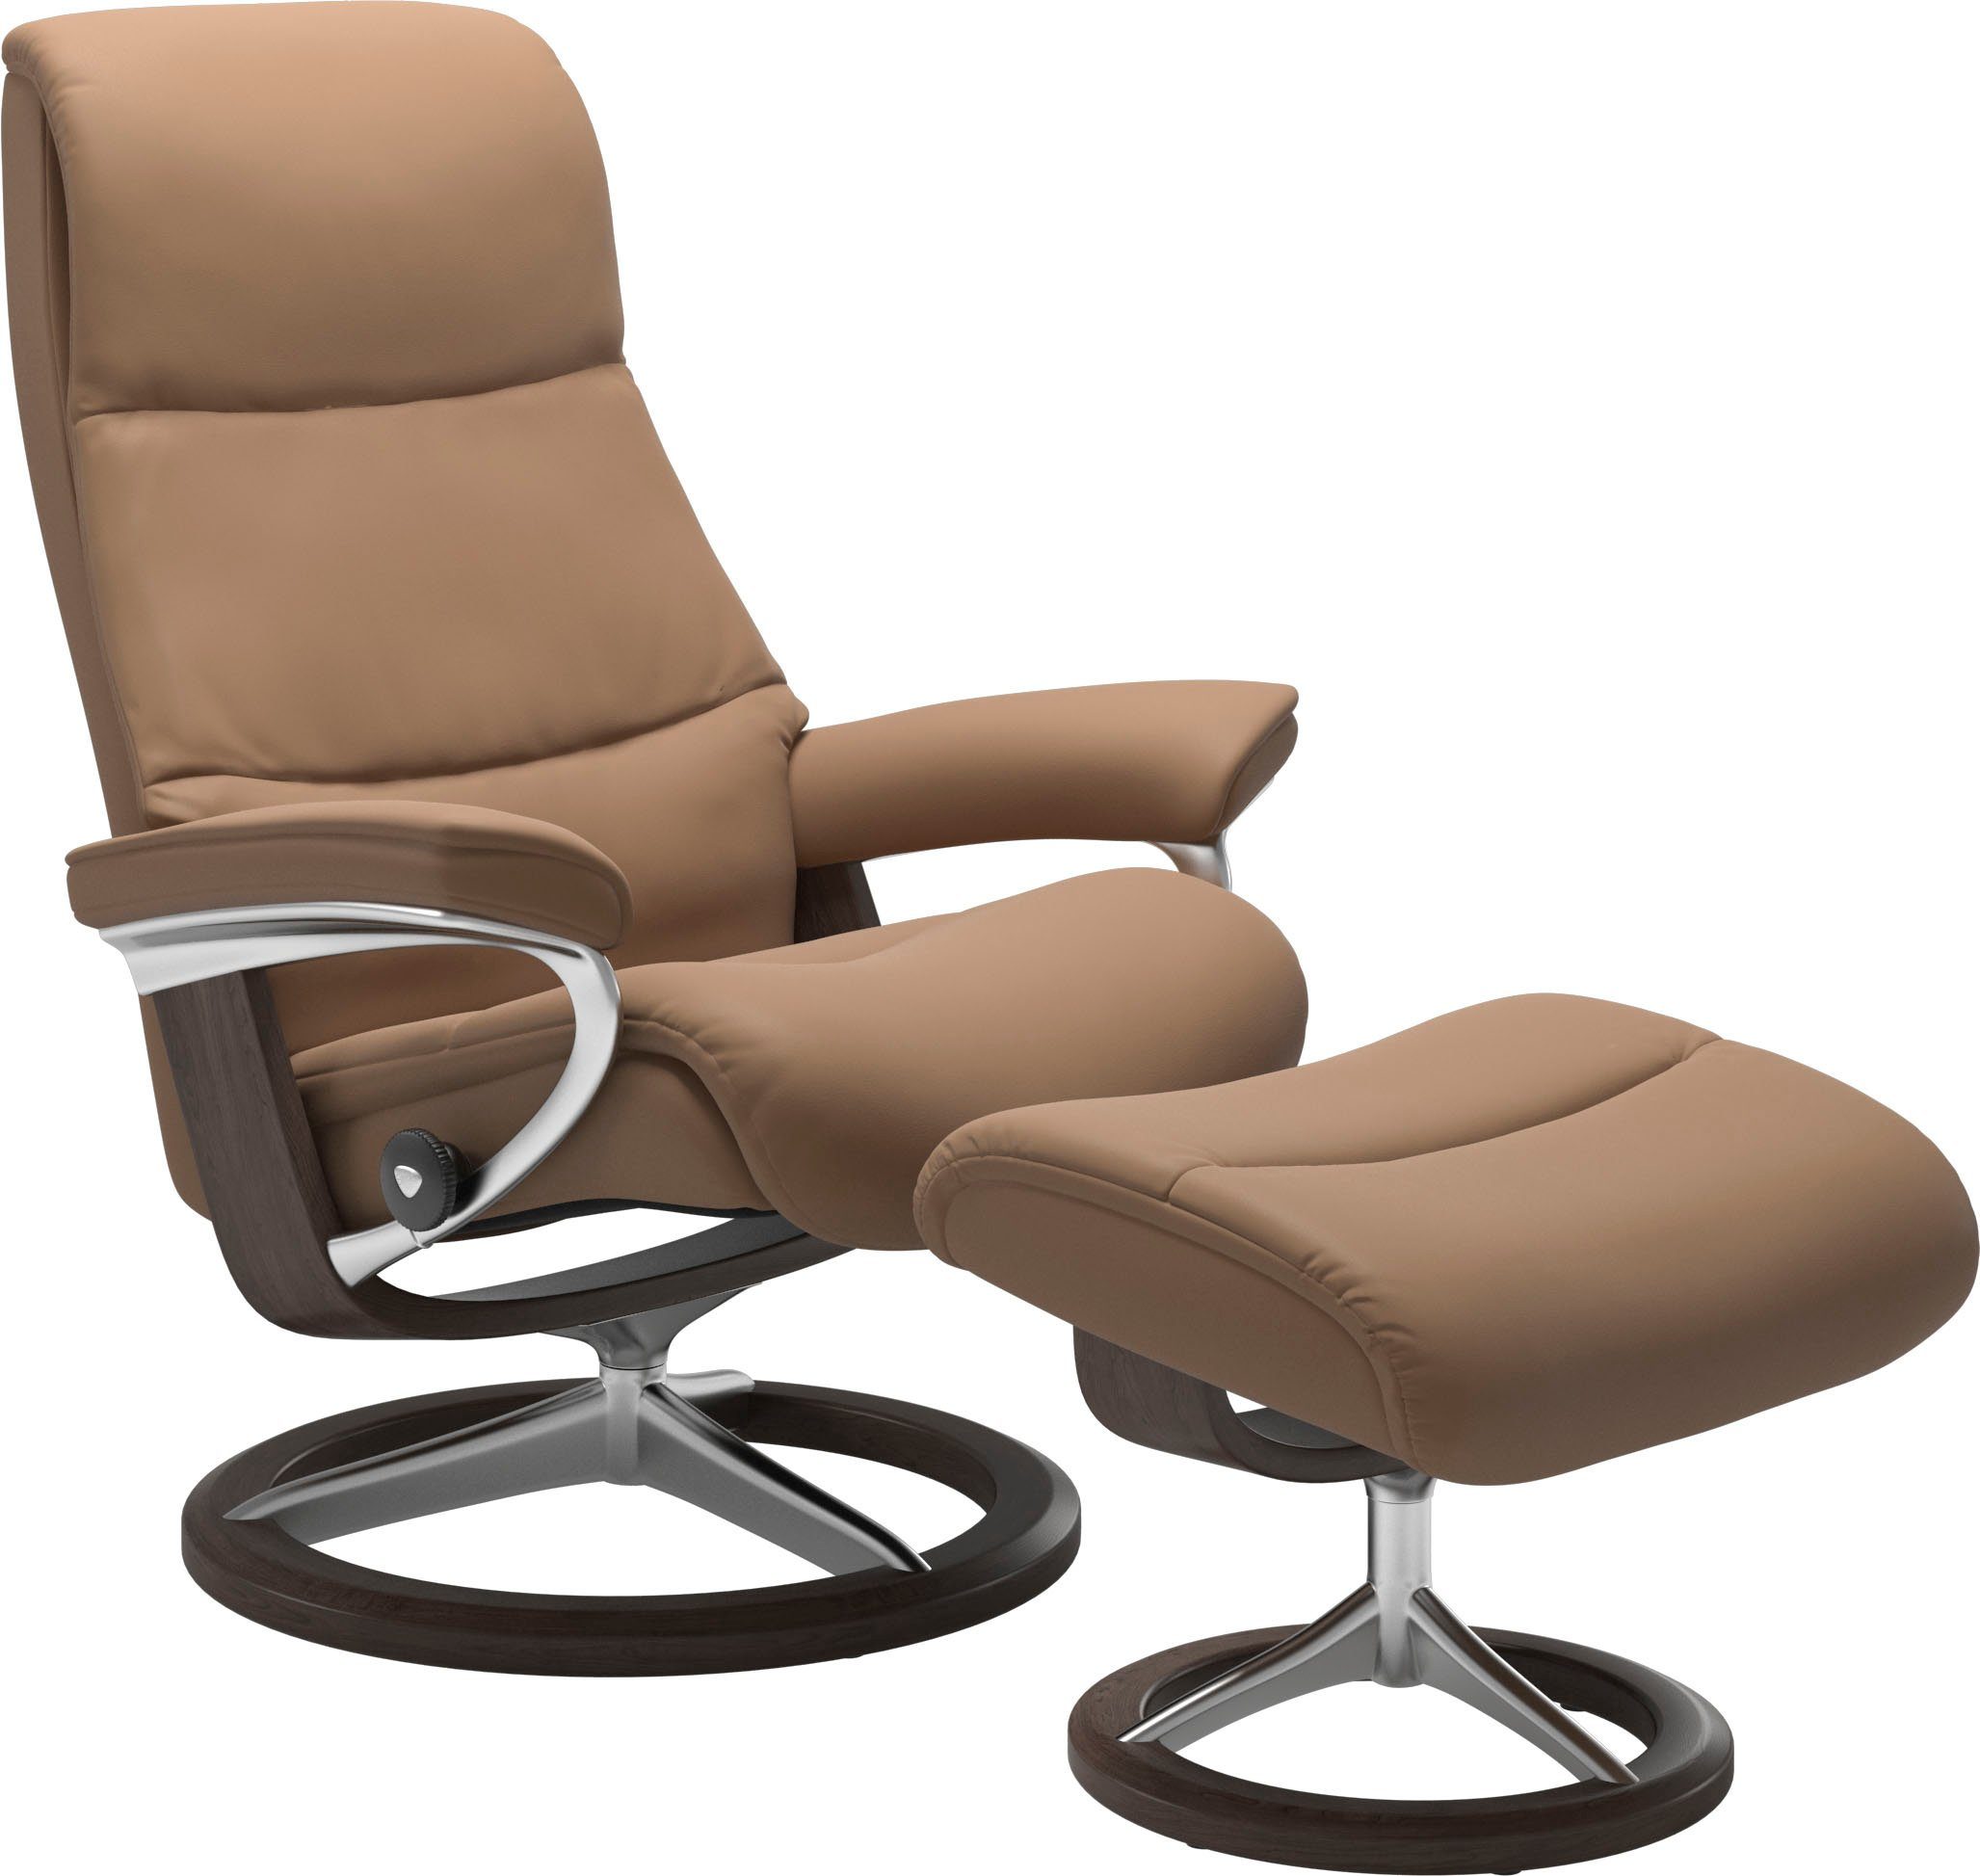 mit Größe L,Gestell Signature Relaxsessel Wenge View, Stressless® Base,